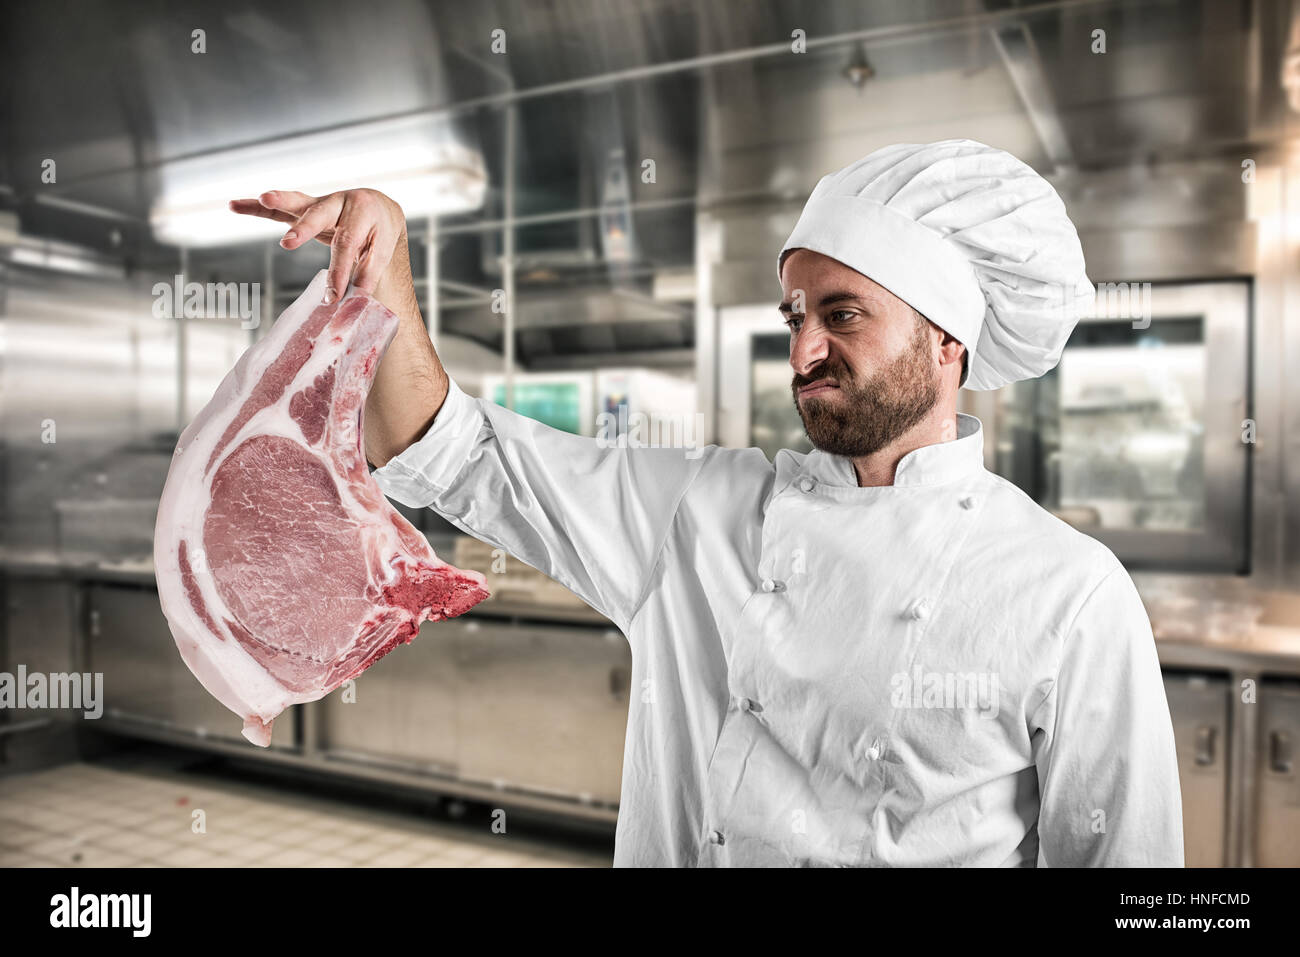 Disgusted vegetarian chef Stock Photo